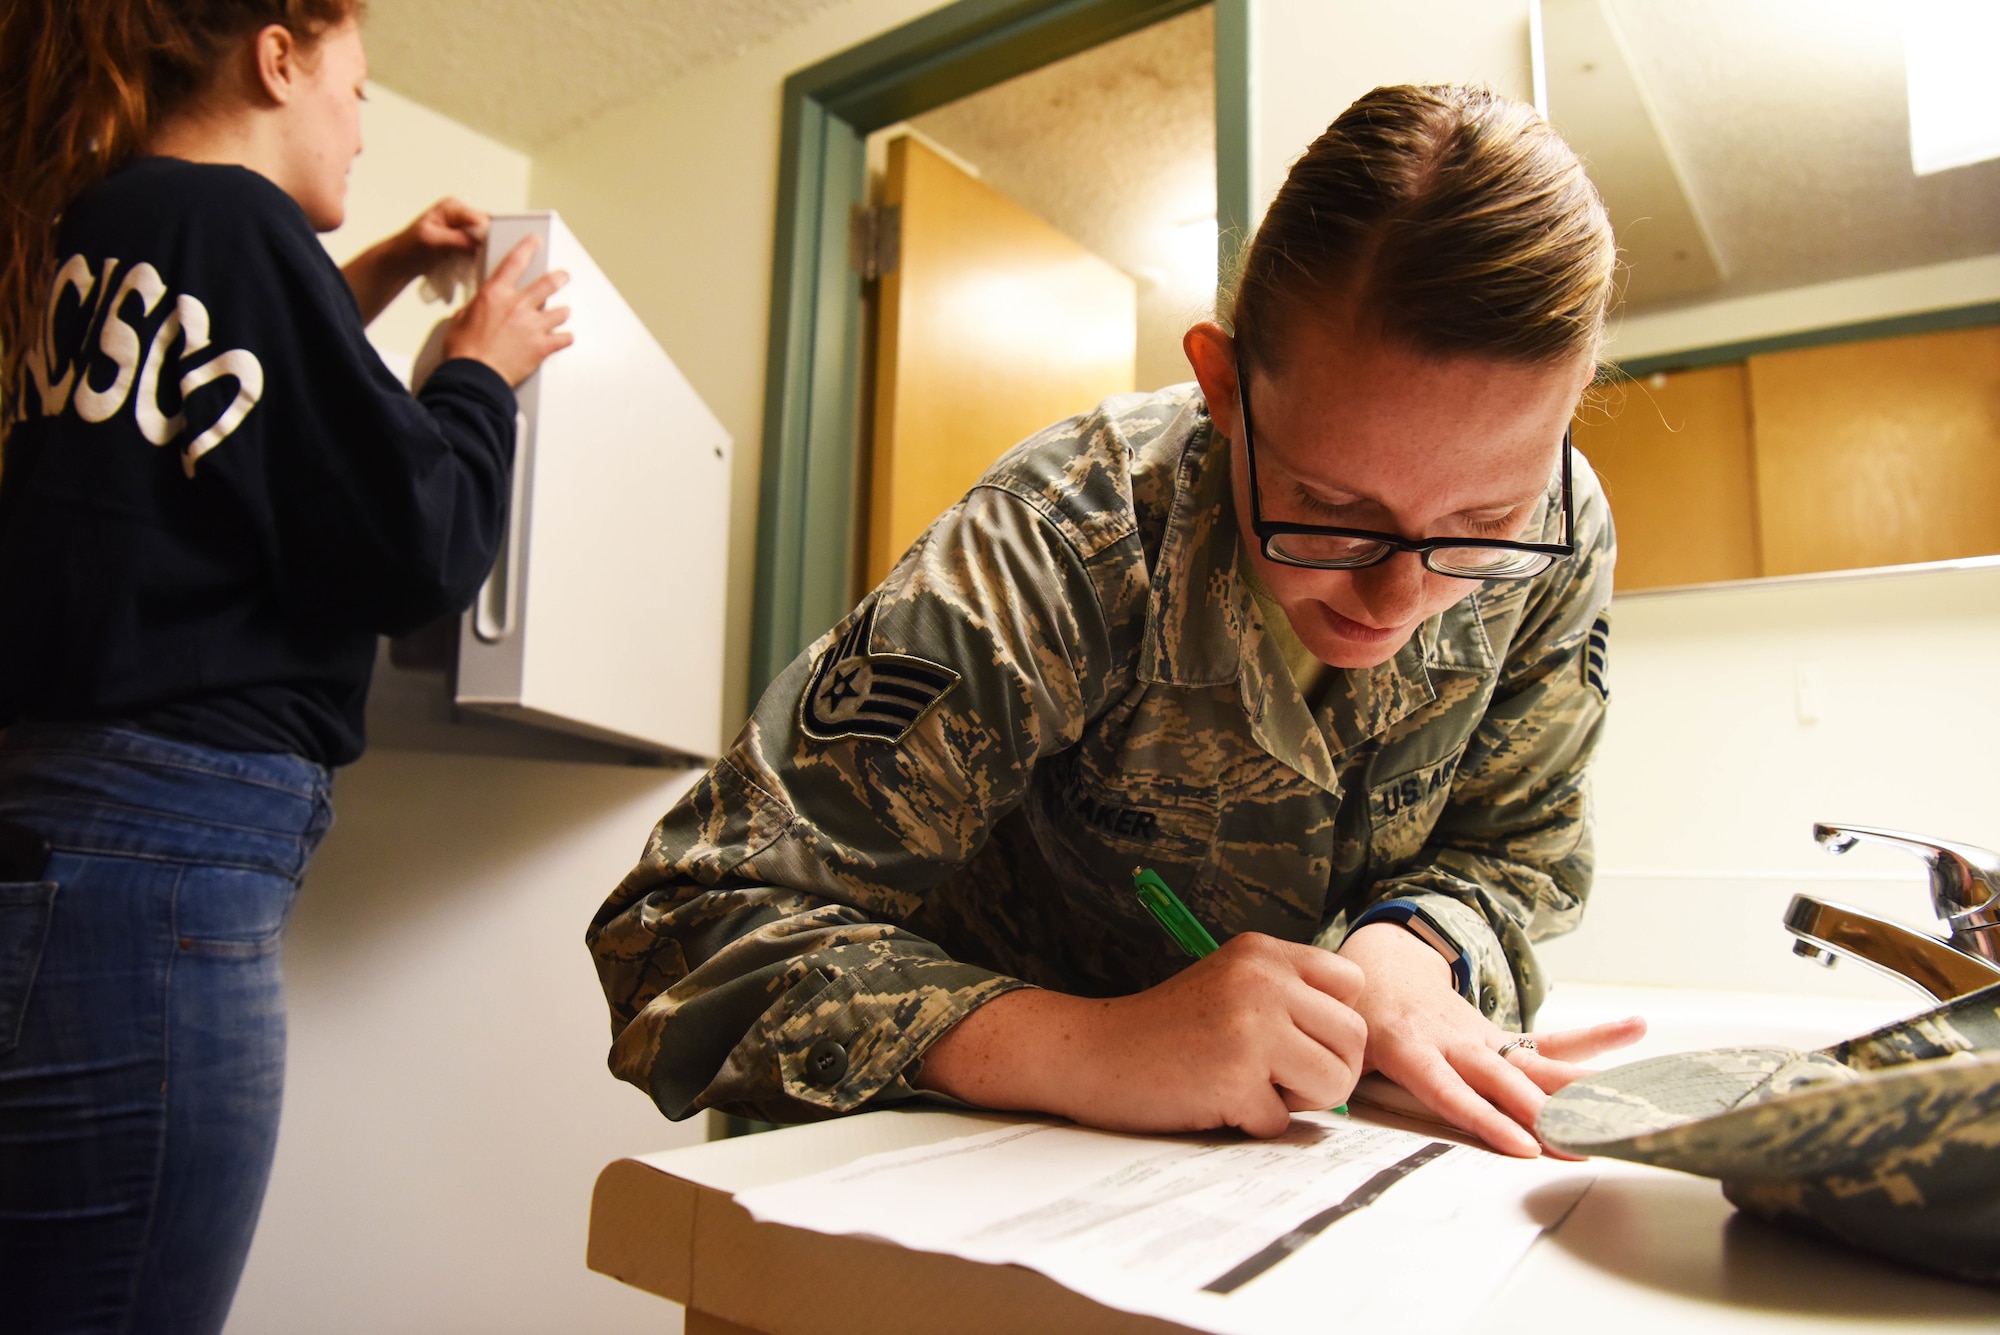 Staff Sgt. Hailey Staker, an Airman dorm leader, completes a checklist at Ellsworth Air Force Base, S.D., July 17, 2018. Dorm leaders verify all processing paperwork and ensure Airman clean their rooms before new residents move in. (U.S. Air Force photo by Airman 1st Class Thomas Karol)